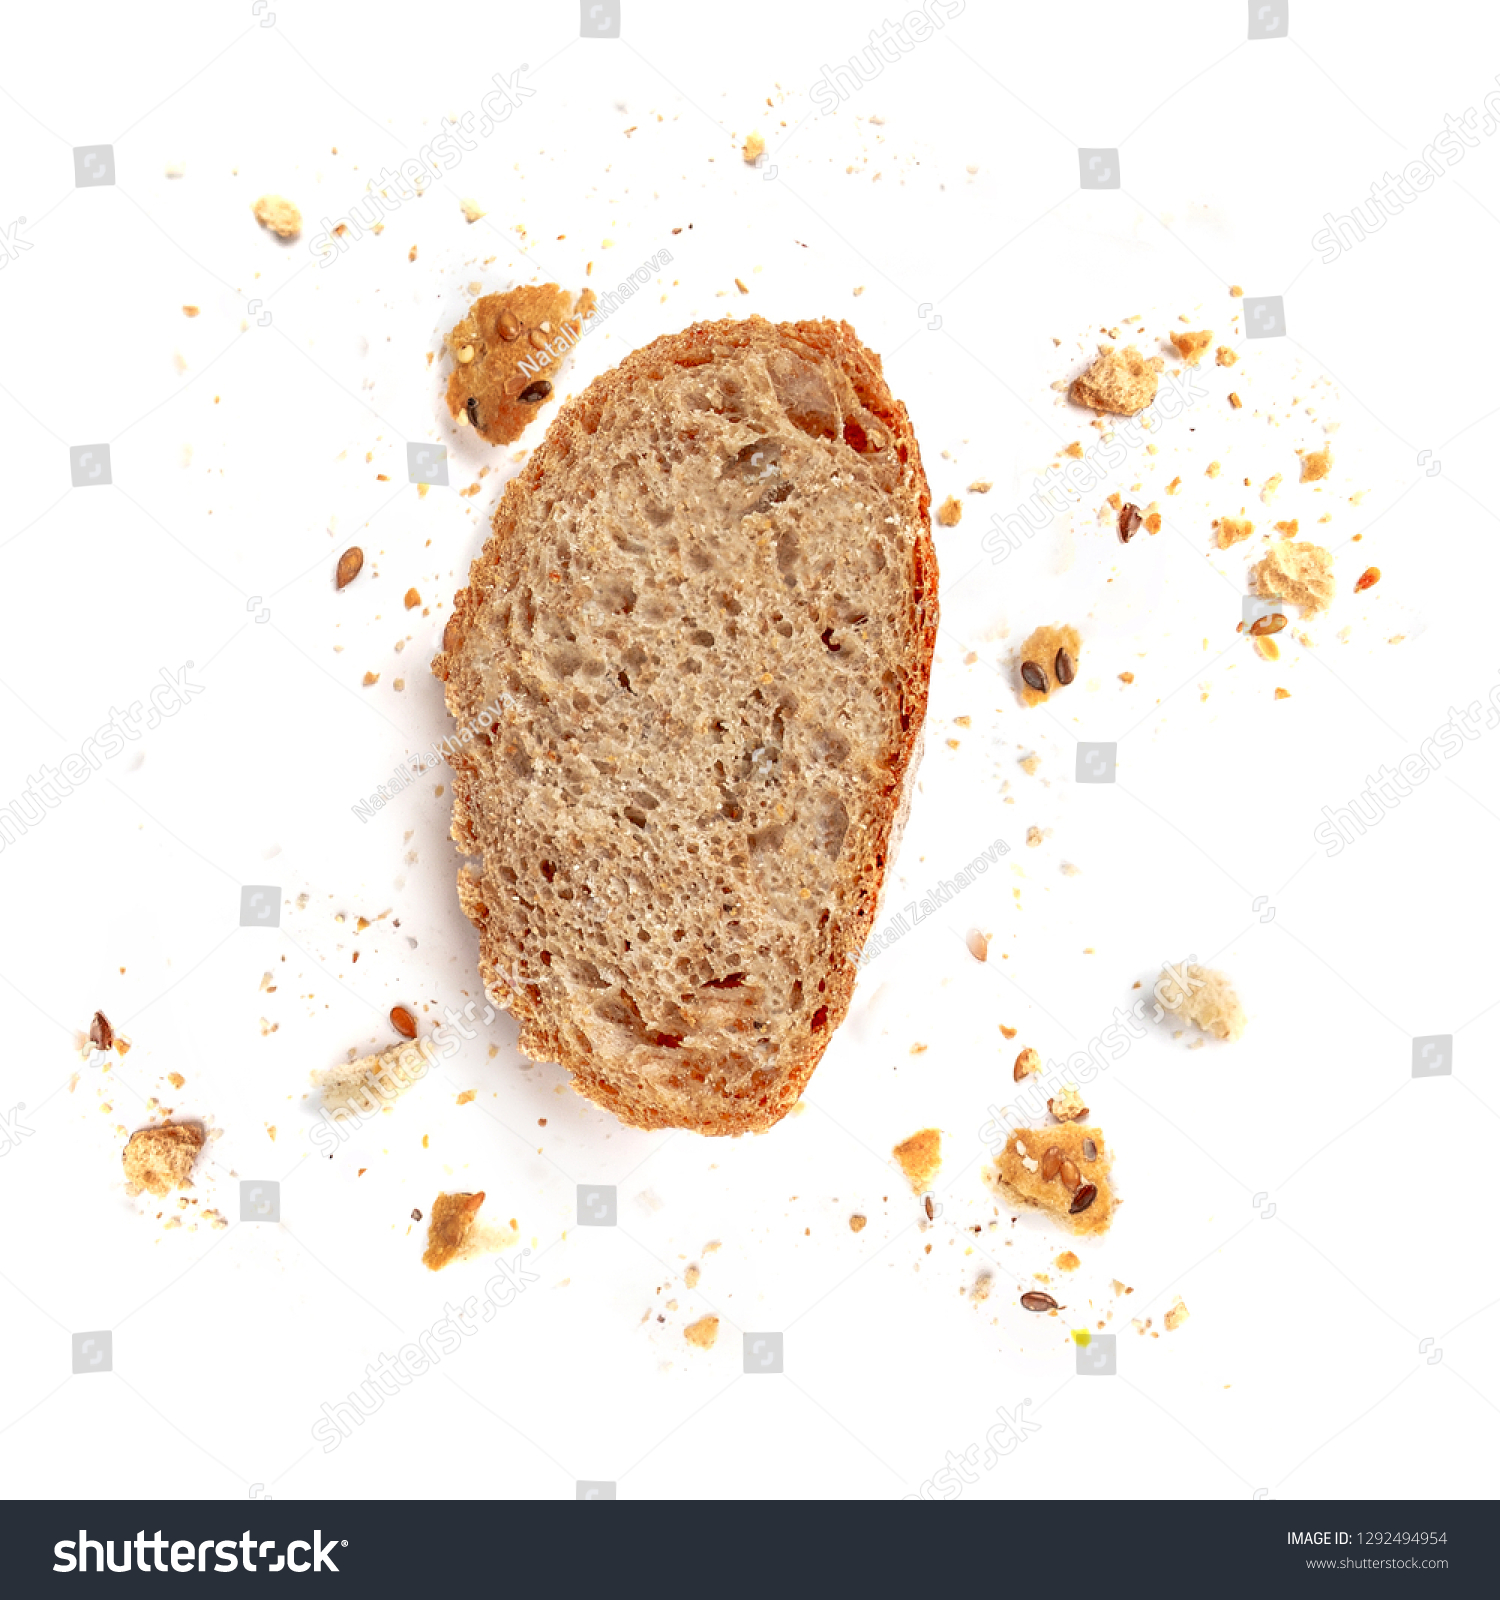 Bread toast  isolated on  white background. Crumbs and Bread slice close up. Bakery, food concept. Top view #1292494954